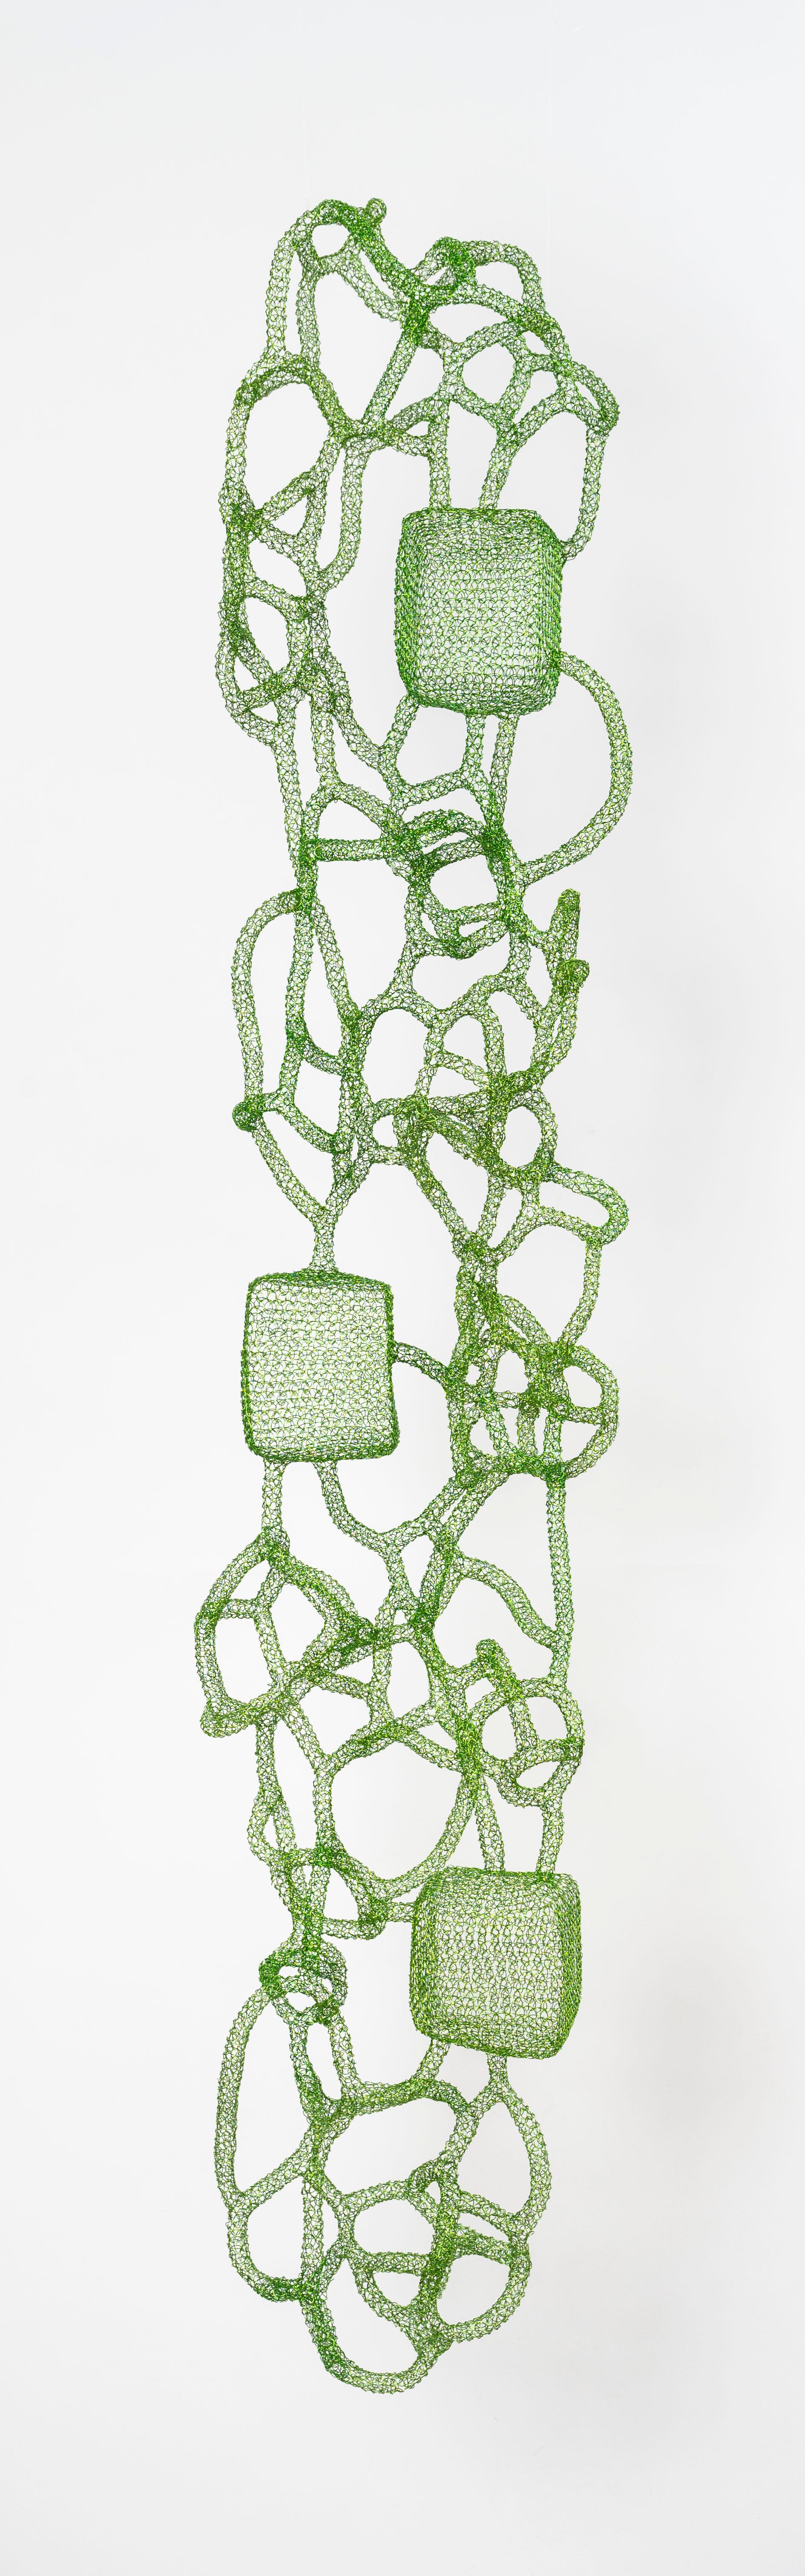 Named 'Fujino,' this metallic sculpture is hand-woven from lacquered green iron wire by the artist Delphine Grandvaux. Featuring cubic forms set within a complex web-like structure, it conveys a story of symbiosis between human achievements and